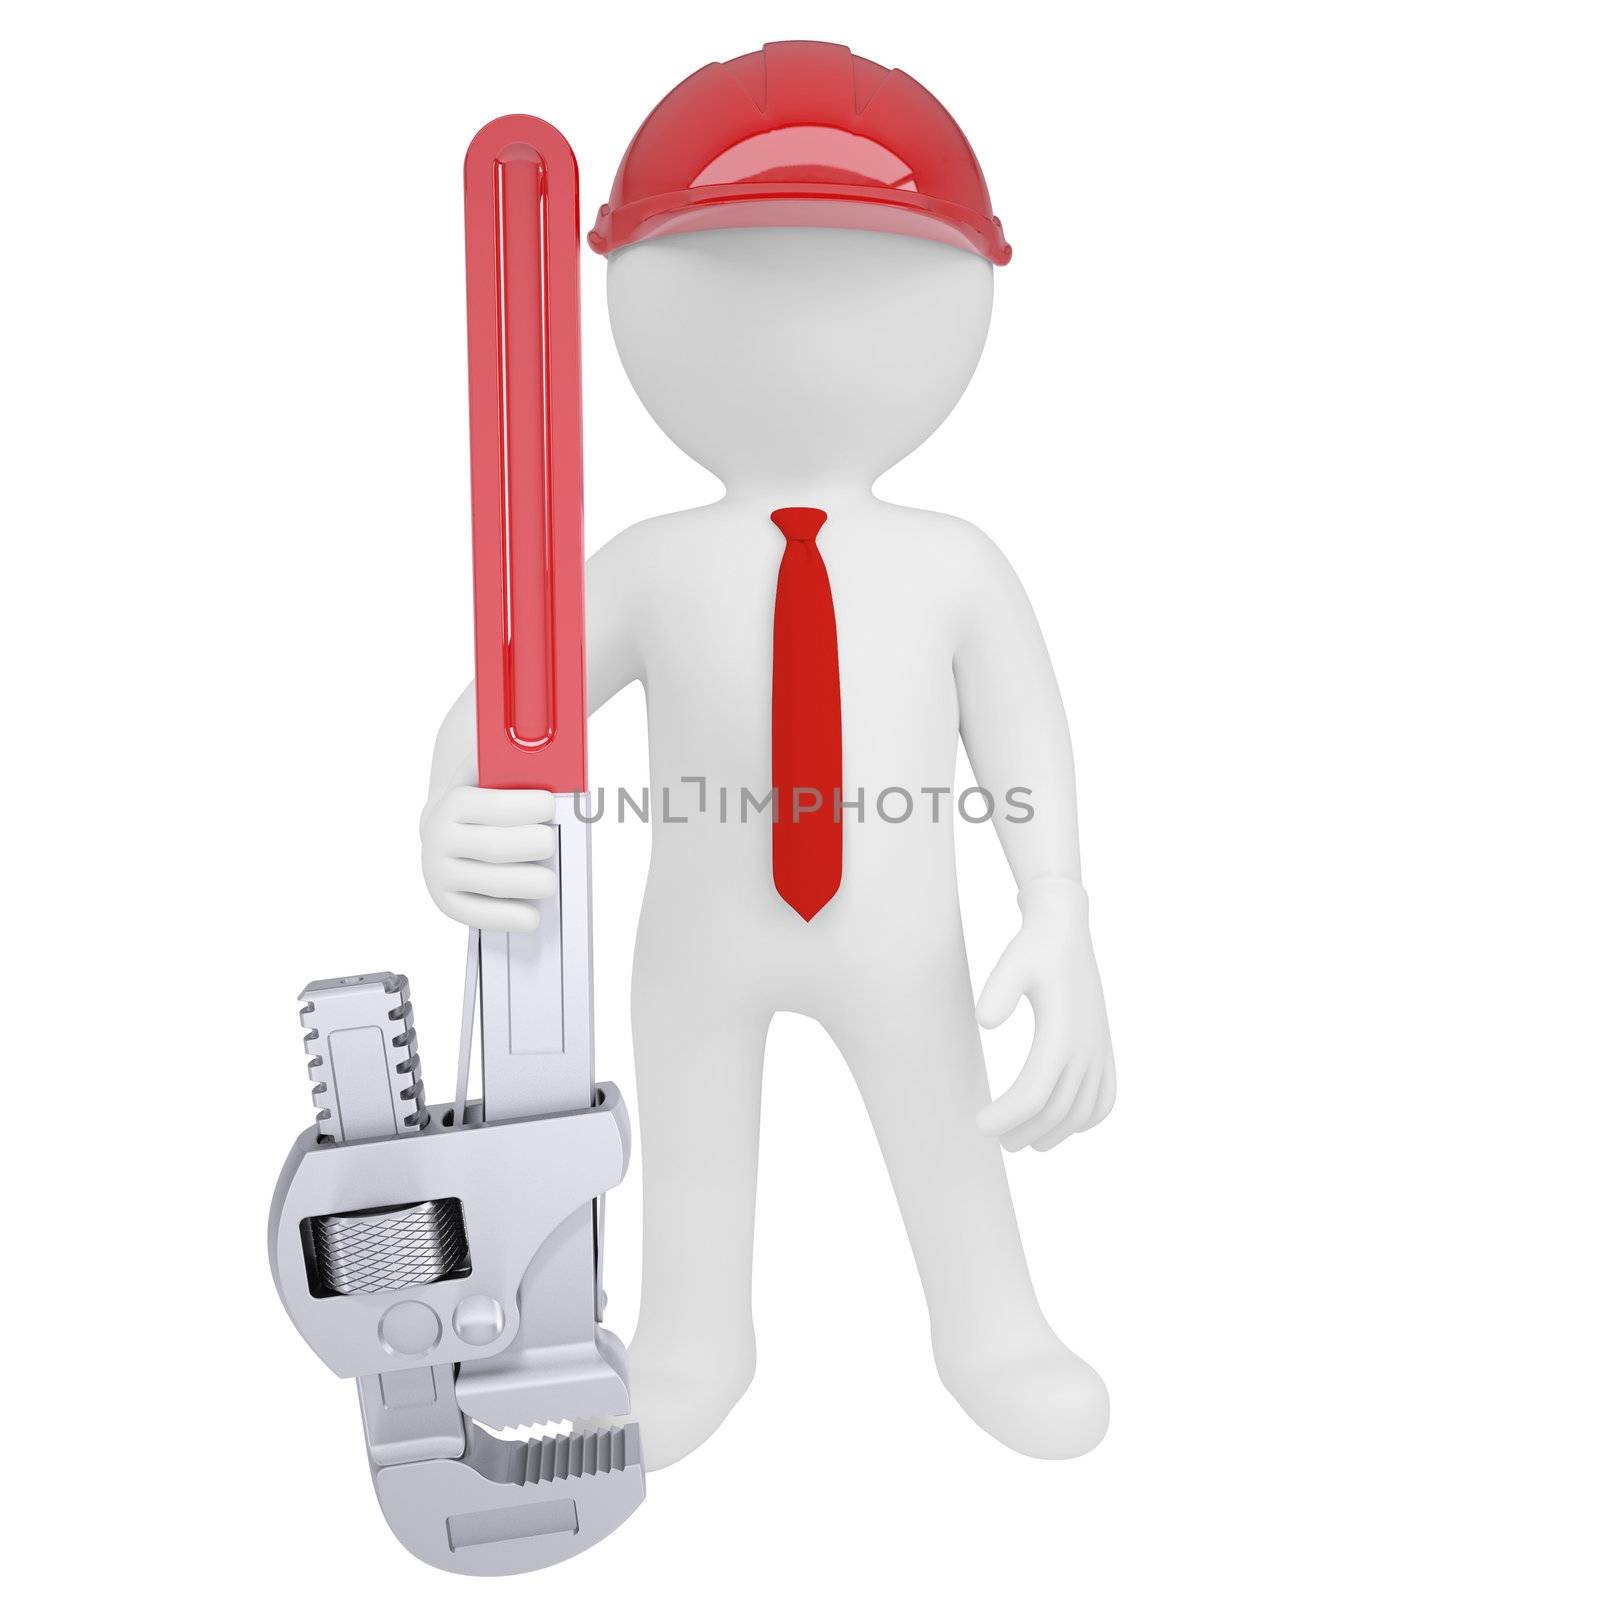 3D man holding a pipe wrench. Isolated render on a white background